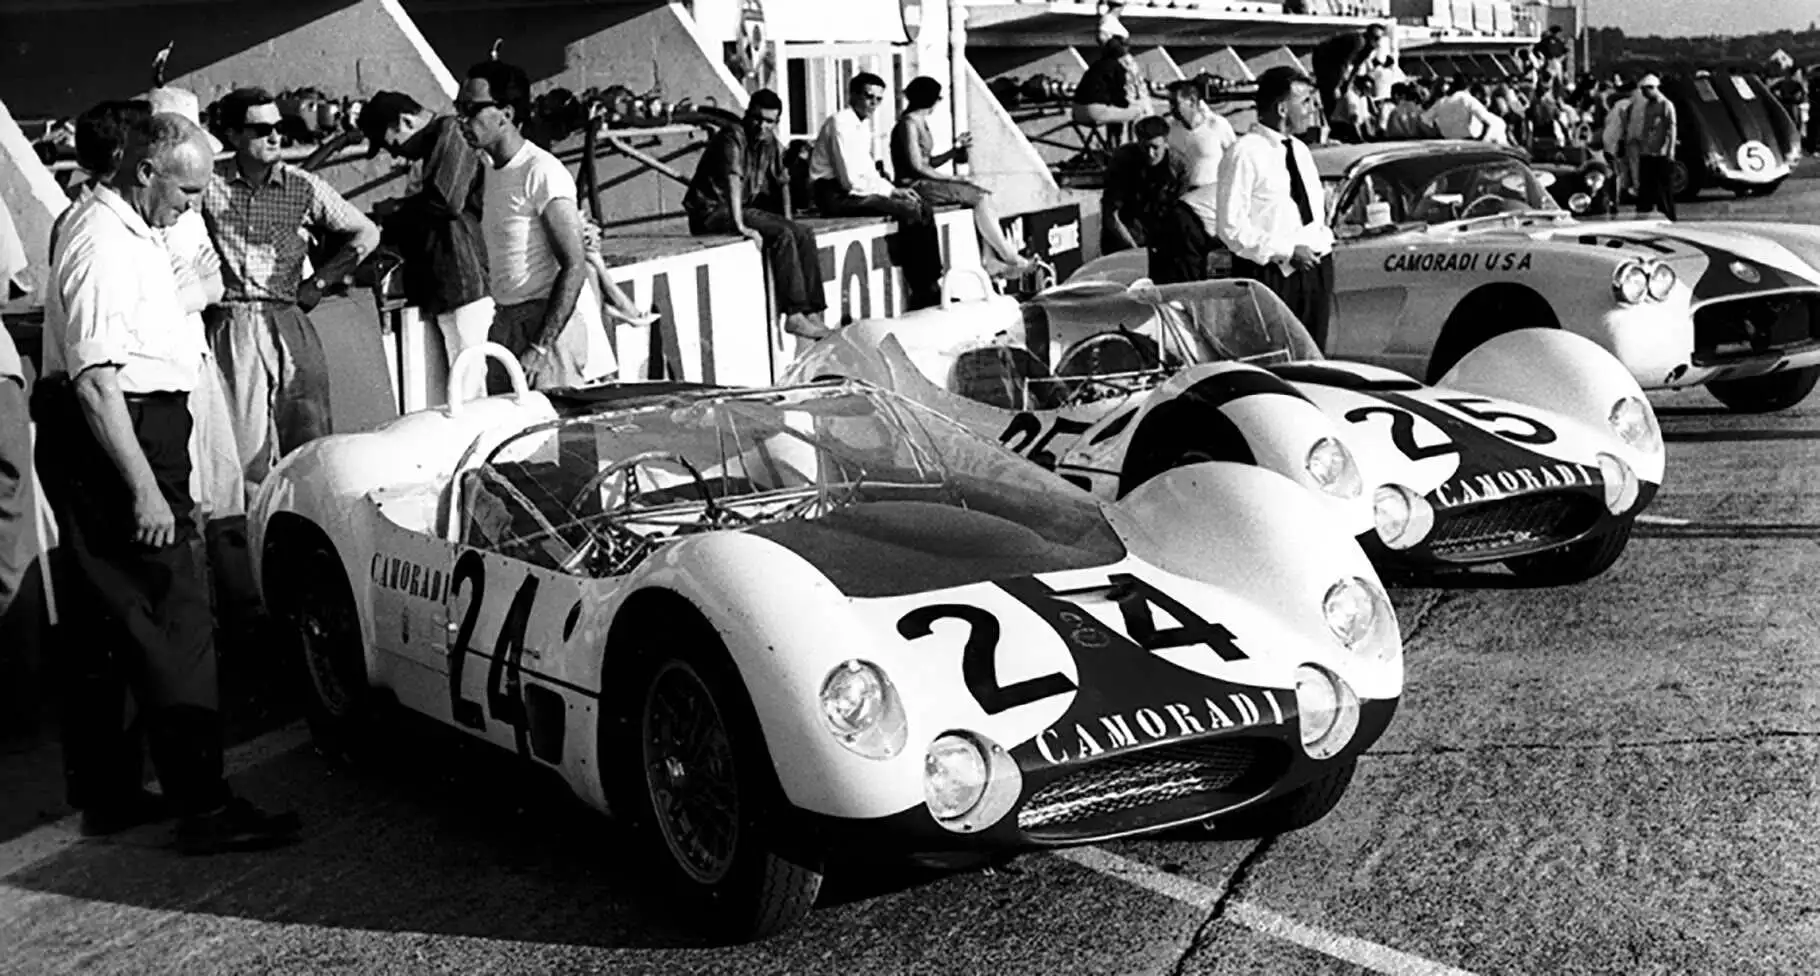 Scuderia Camoradi. From the dream to the tragedy of Le Mans